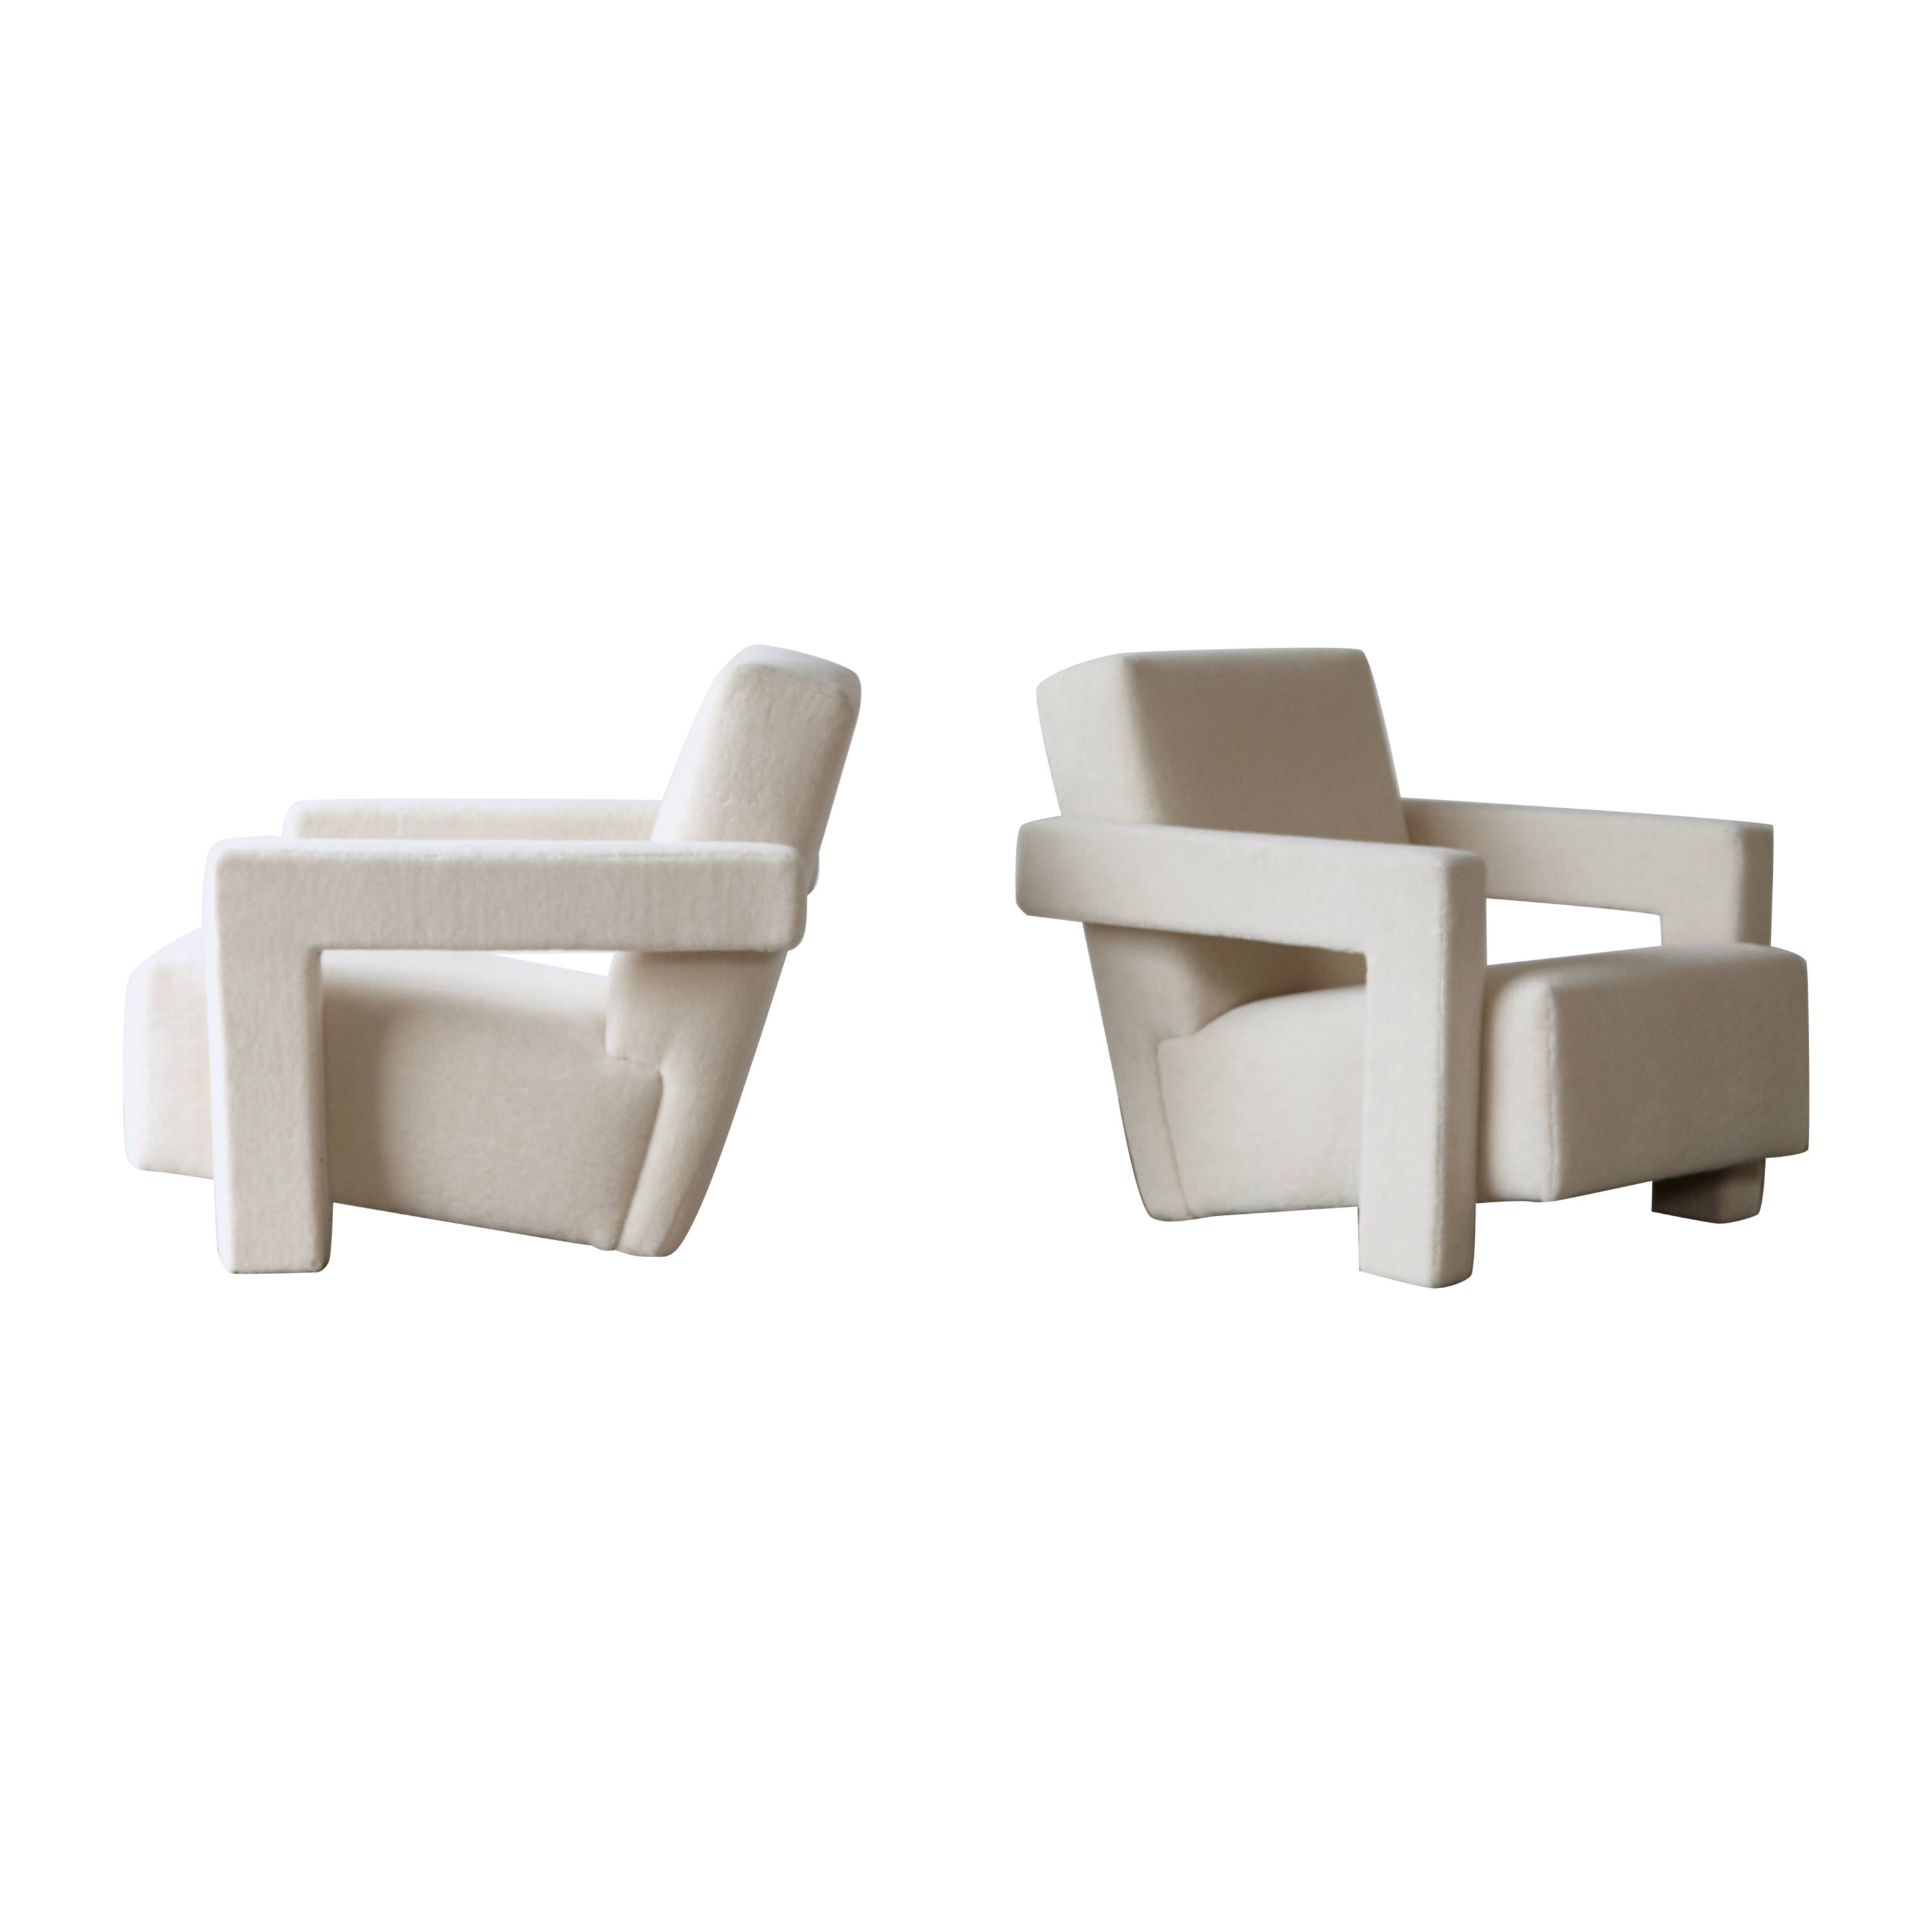 Gerrit Rietveld Utrecht Chairs, Cassina, Newly Upholstered in Pure Alpaca For Sale